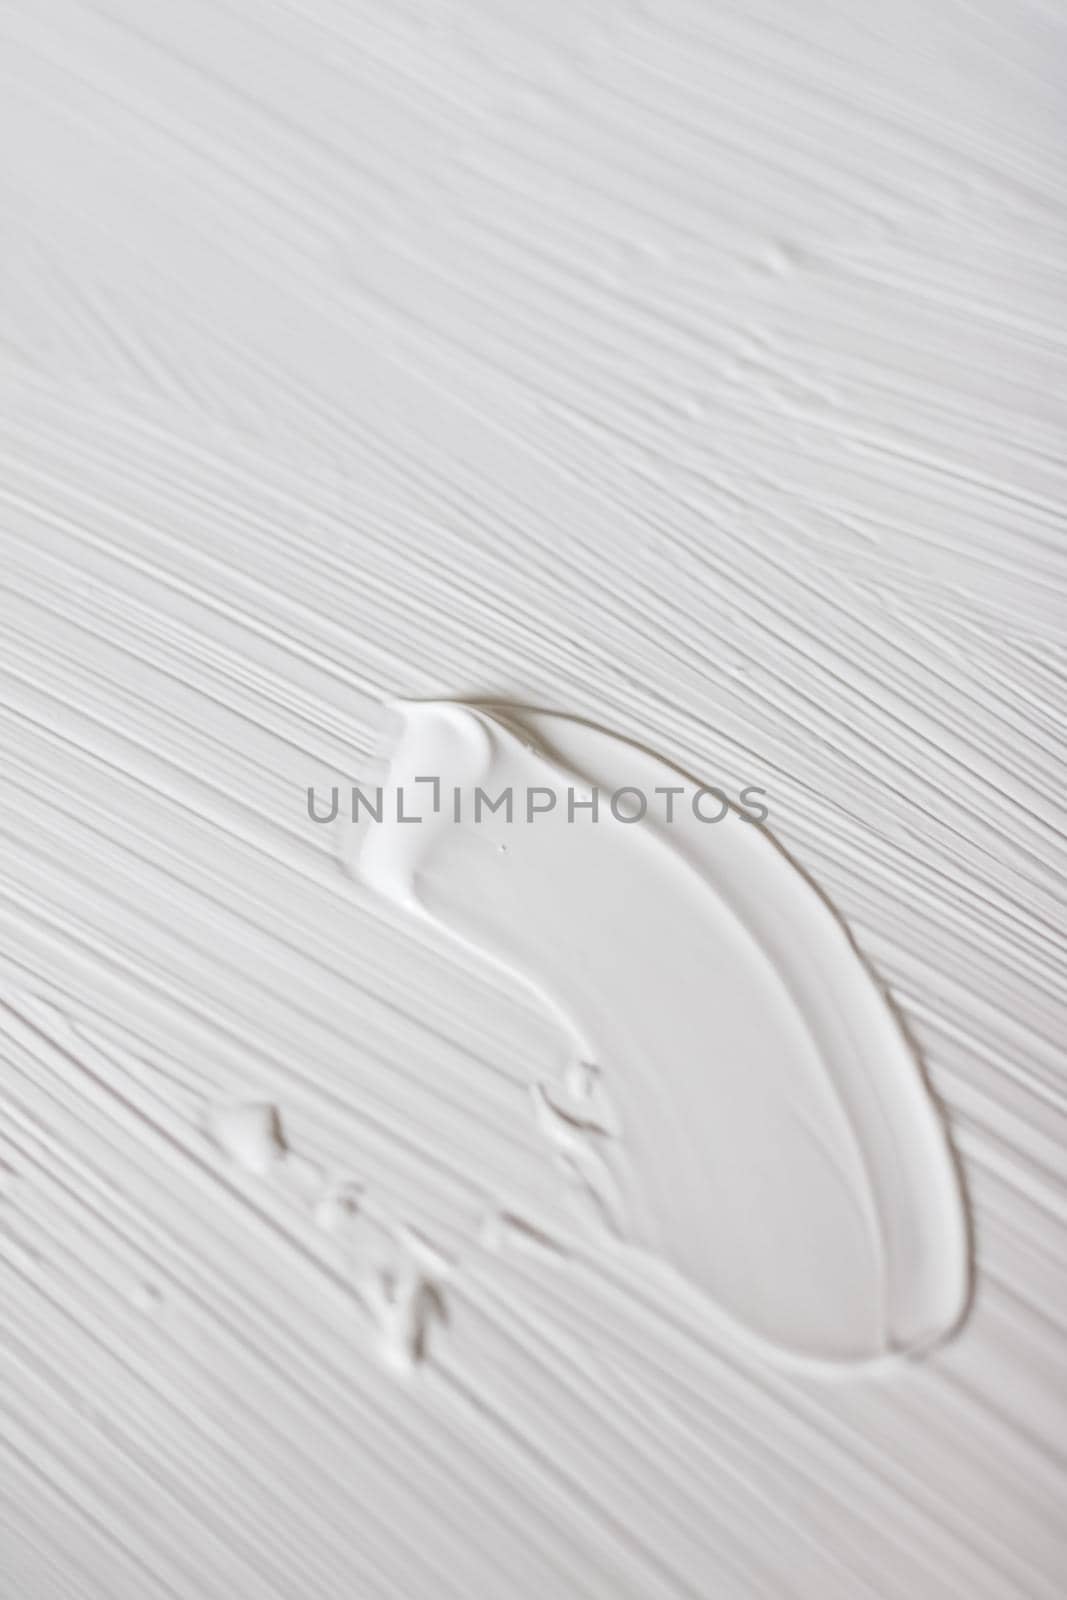 Art, branding and makeup concept - Cosmetics abstract texture background, white acrylic paint brush stroke, textured cream product as make-up backdrop for luxury beauty brand, holiday banner design